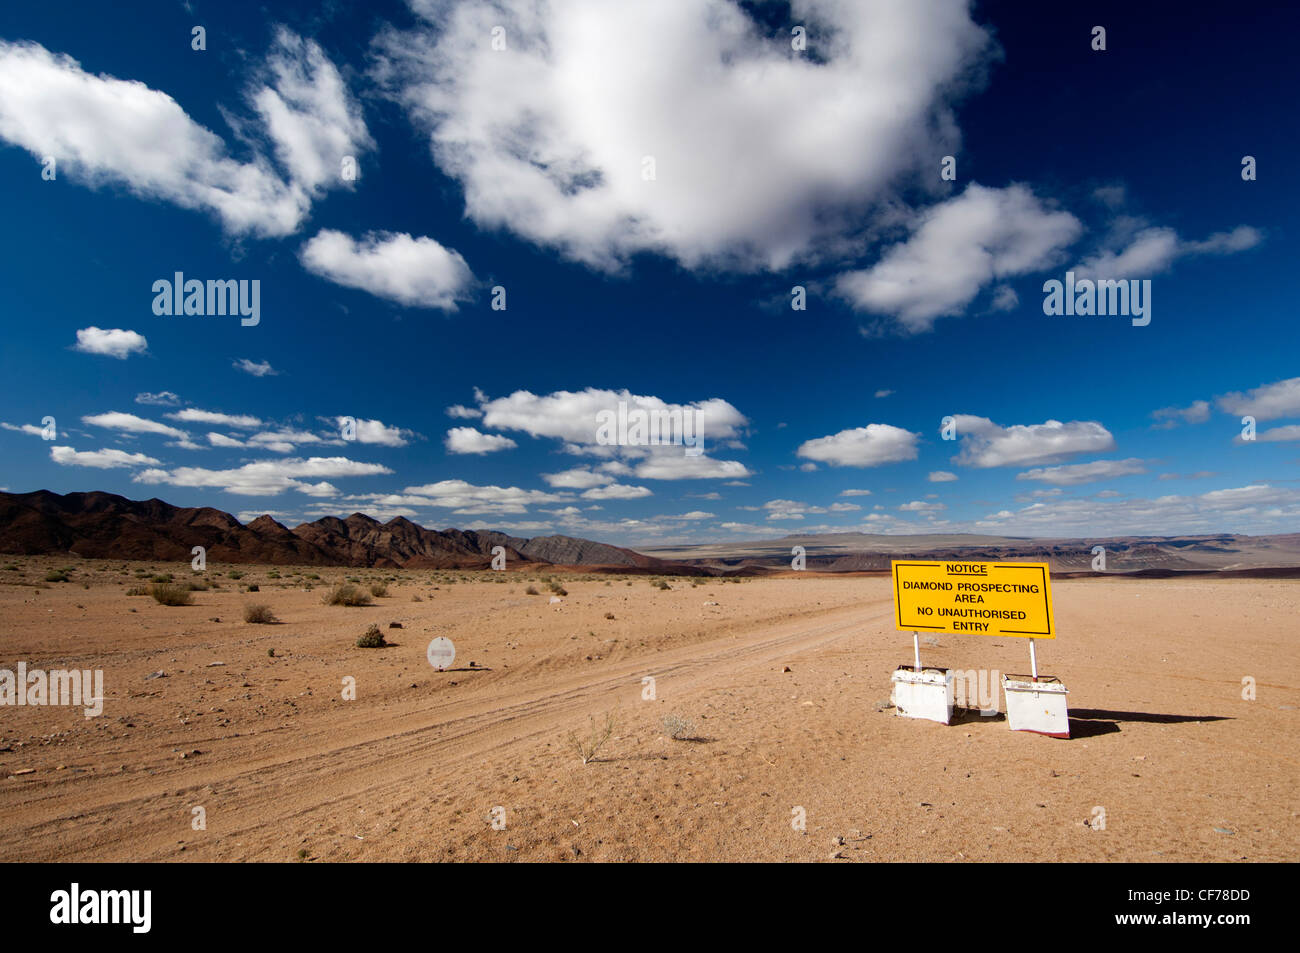 Prohibition sign at the entrance to a diamond prospecting area, Richtersveld National Park, Northern Cape Province, South Africa Stock Photo